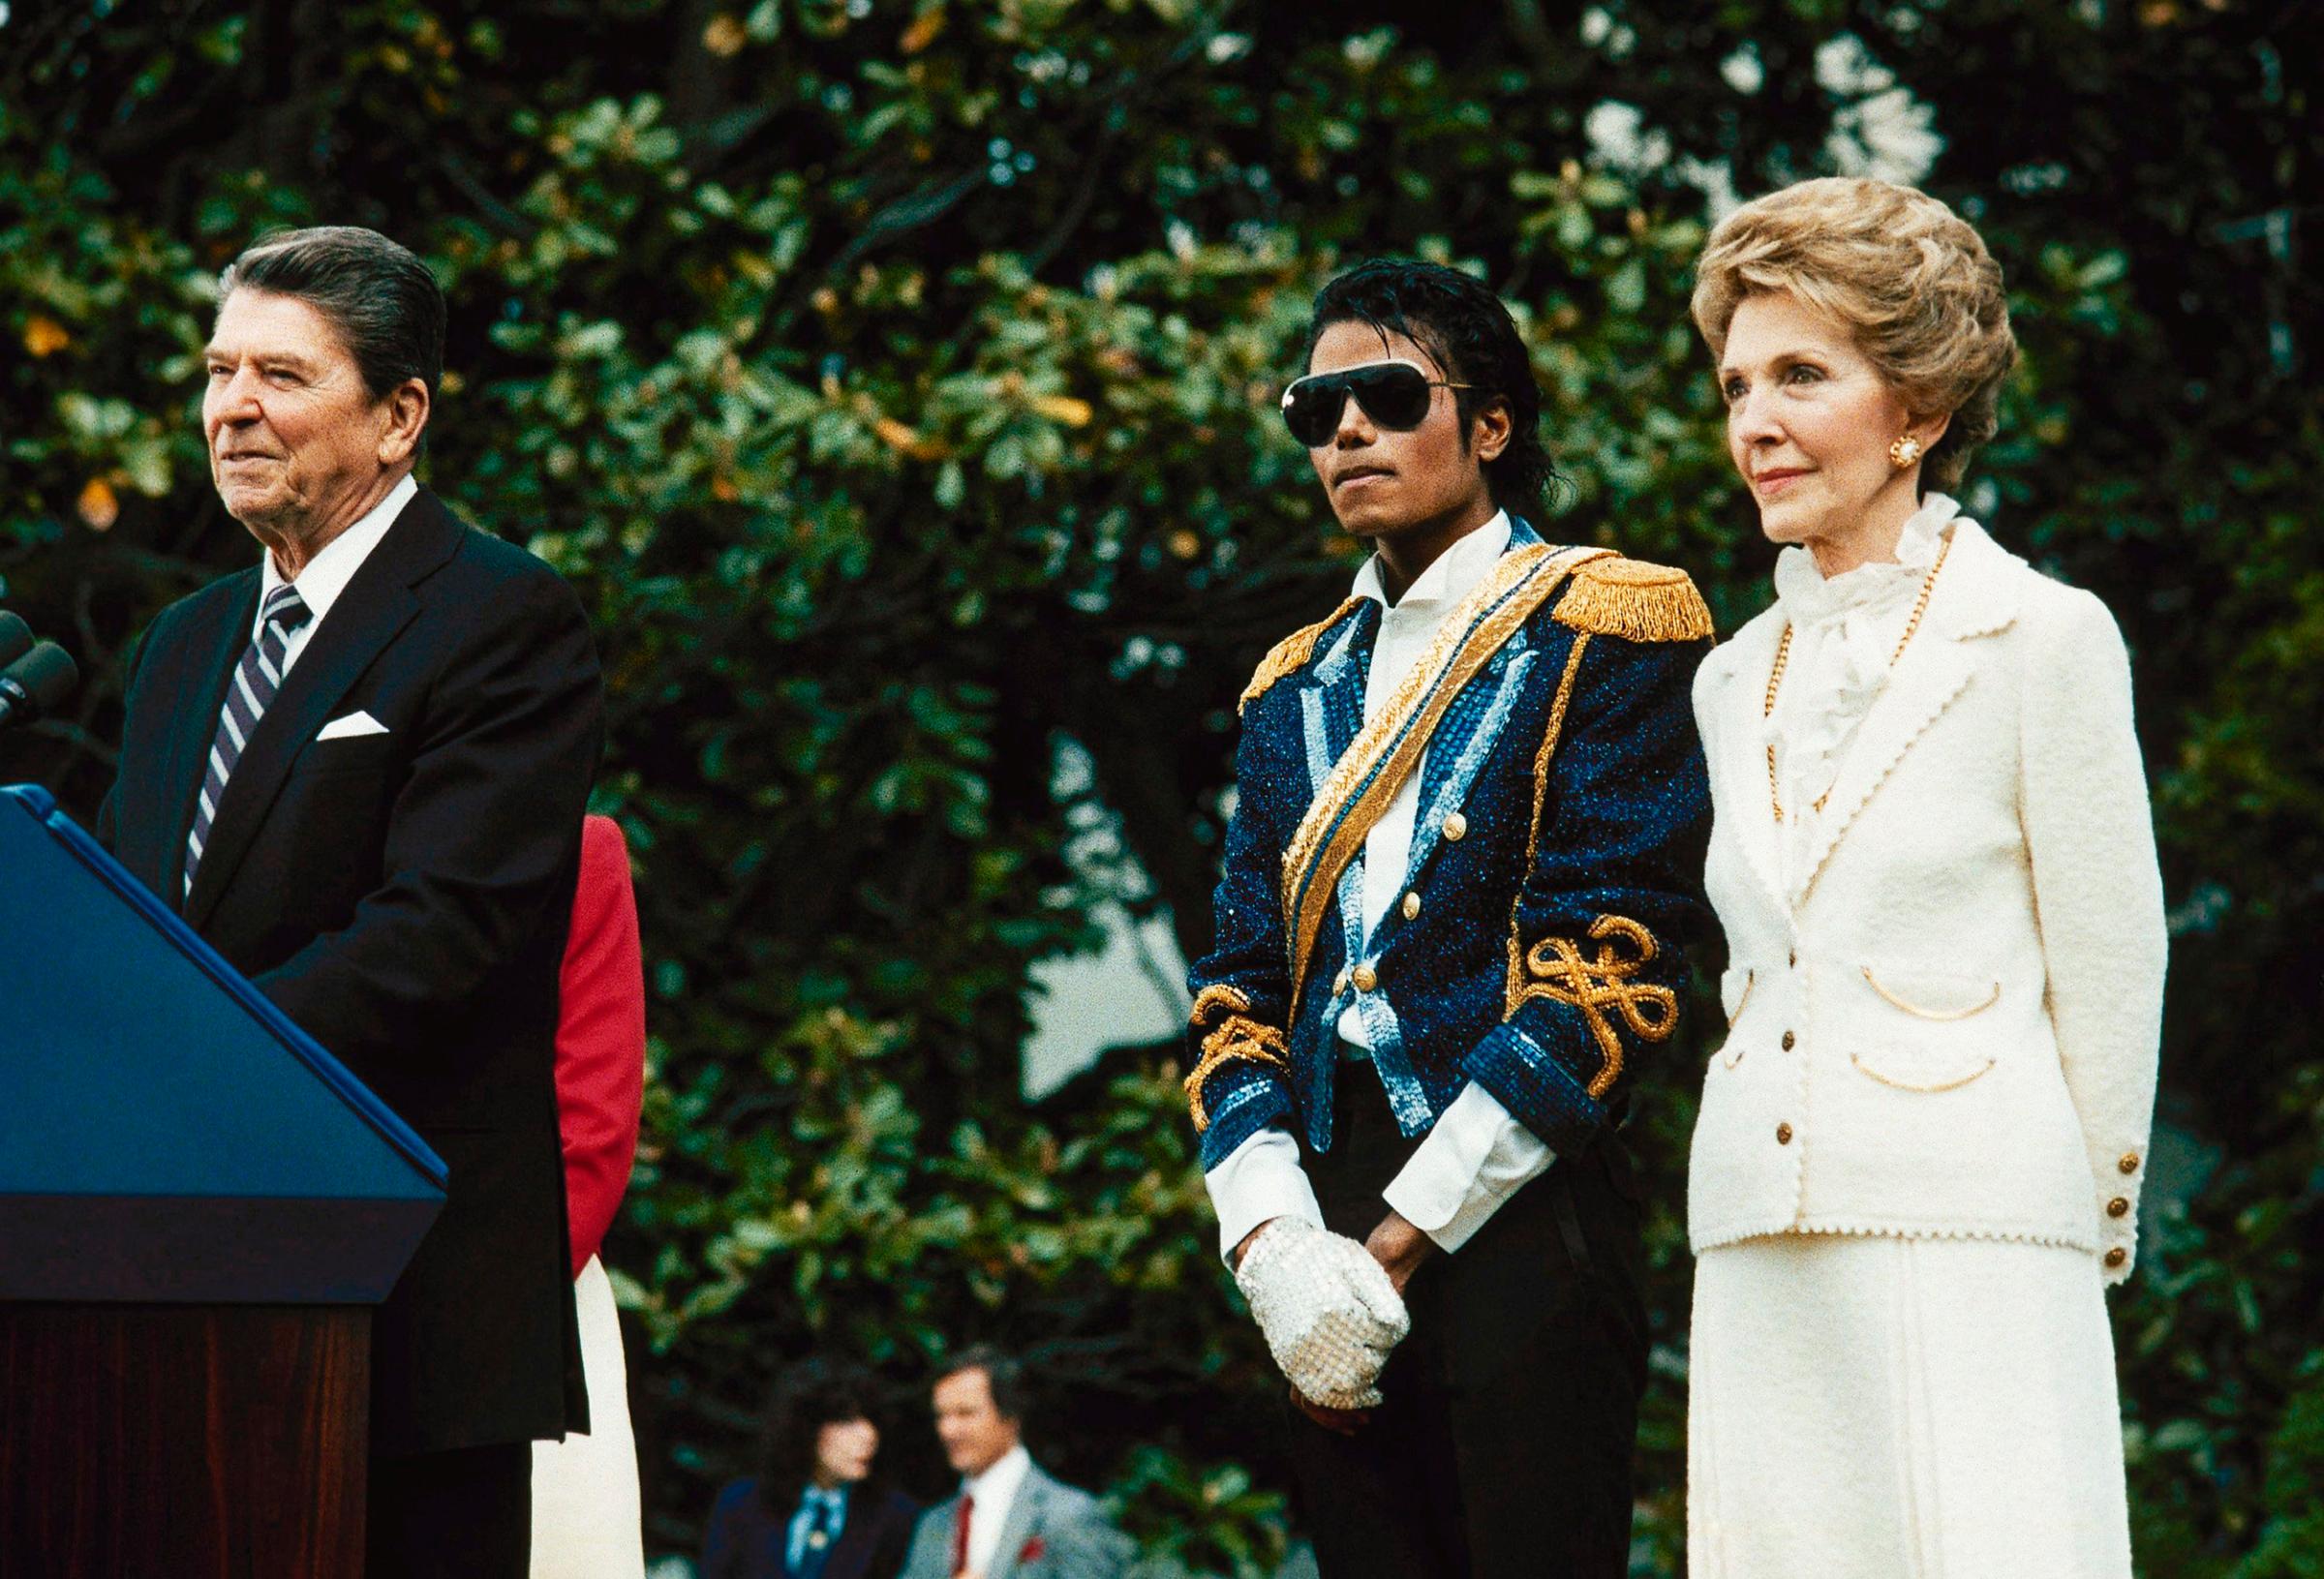 Michael Jackson stands with former President Ronald Reagan and first lady Nancy Reagan on the south lawn of the White House prior to receiving an award from the president for his contribution to the drunk driving awareness program in Washington, DC on May 14, 1984.